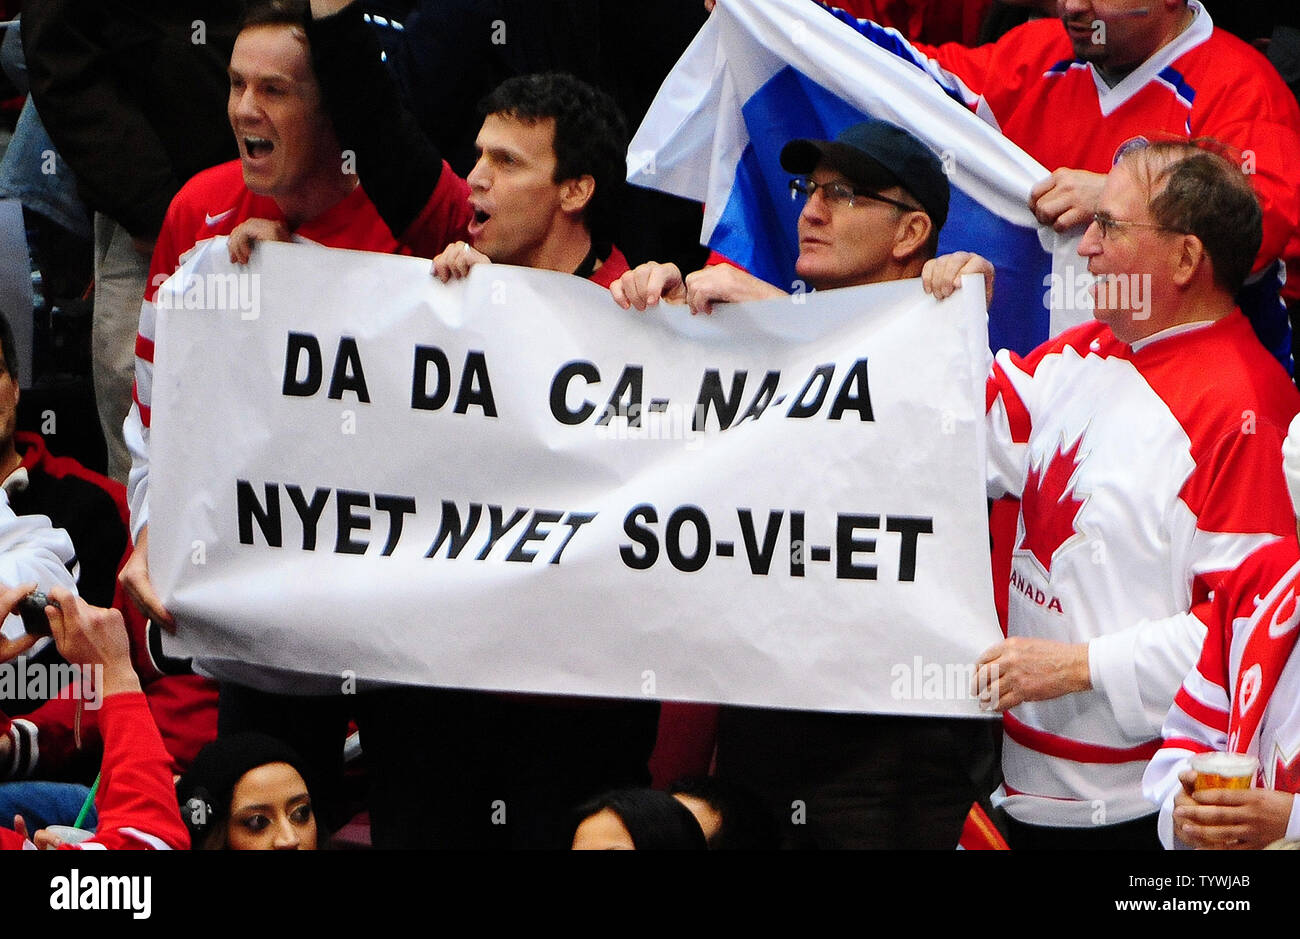 canadian-fans-show-off-a-sign-that-says-yes-yes-canada-no-no-soviet-before-the-canada-russian-mens-hockey-quarter-final-game-at-canada-hockey-place-in-vancouver-canada-during-the-2010-winter-olympics-on-february-24-2010-canada-beat-russia-7-3-upiroger-l-wollenberg-TYWJAB.jpg